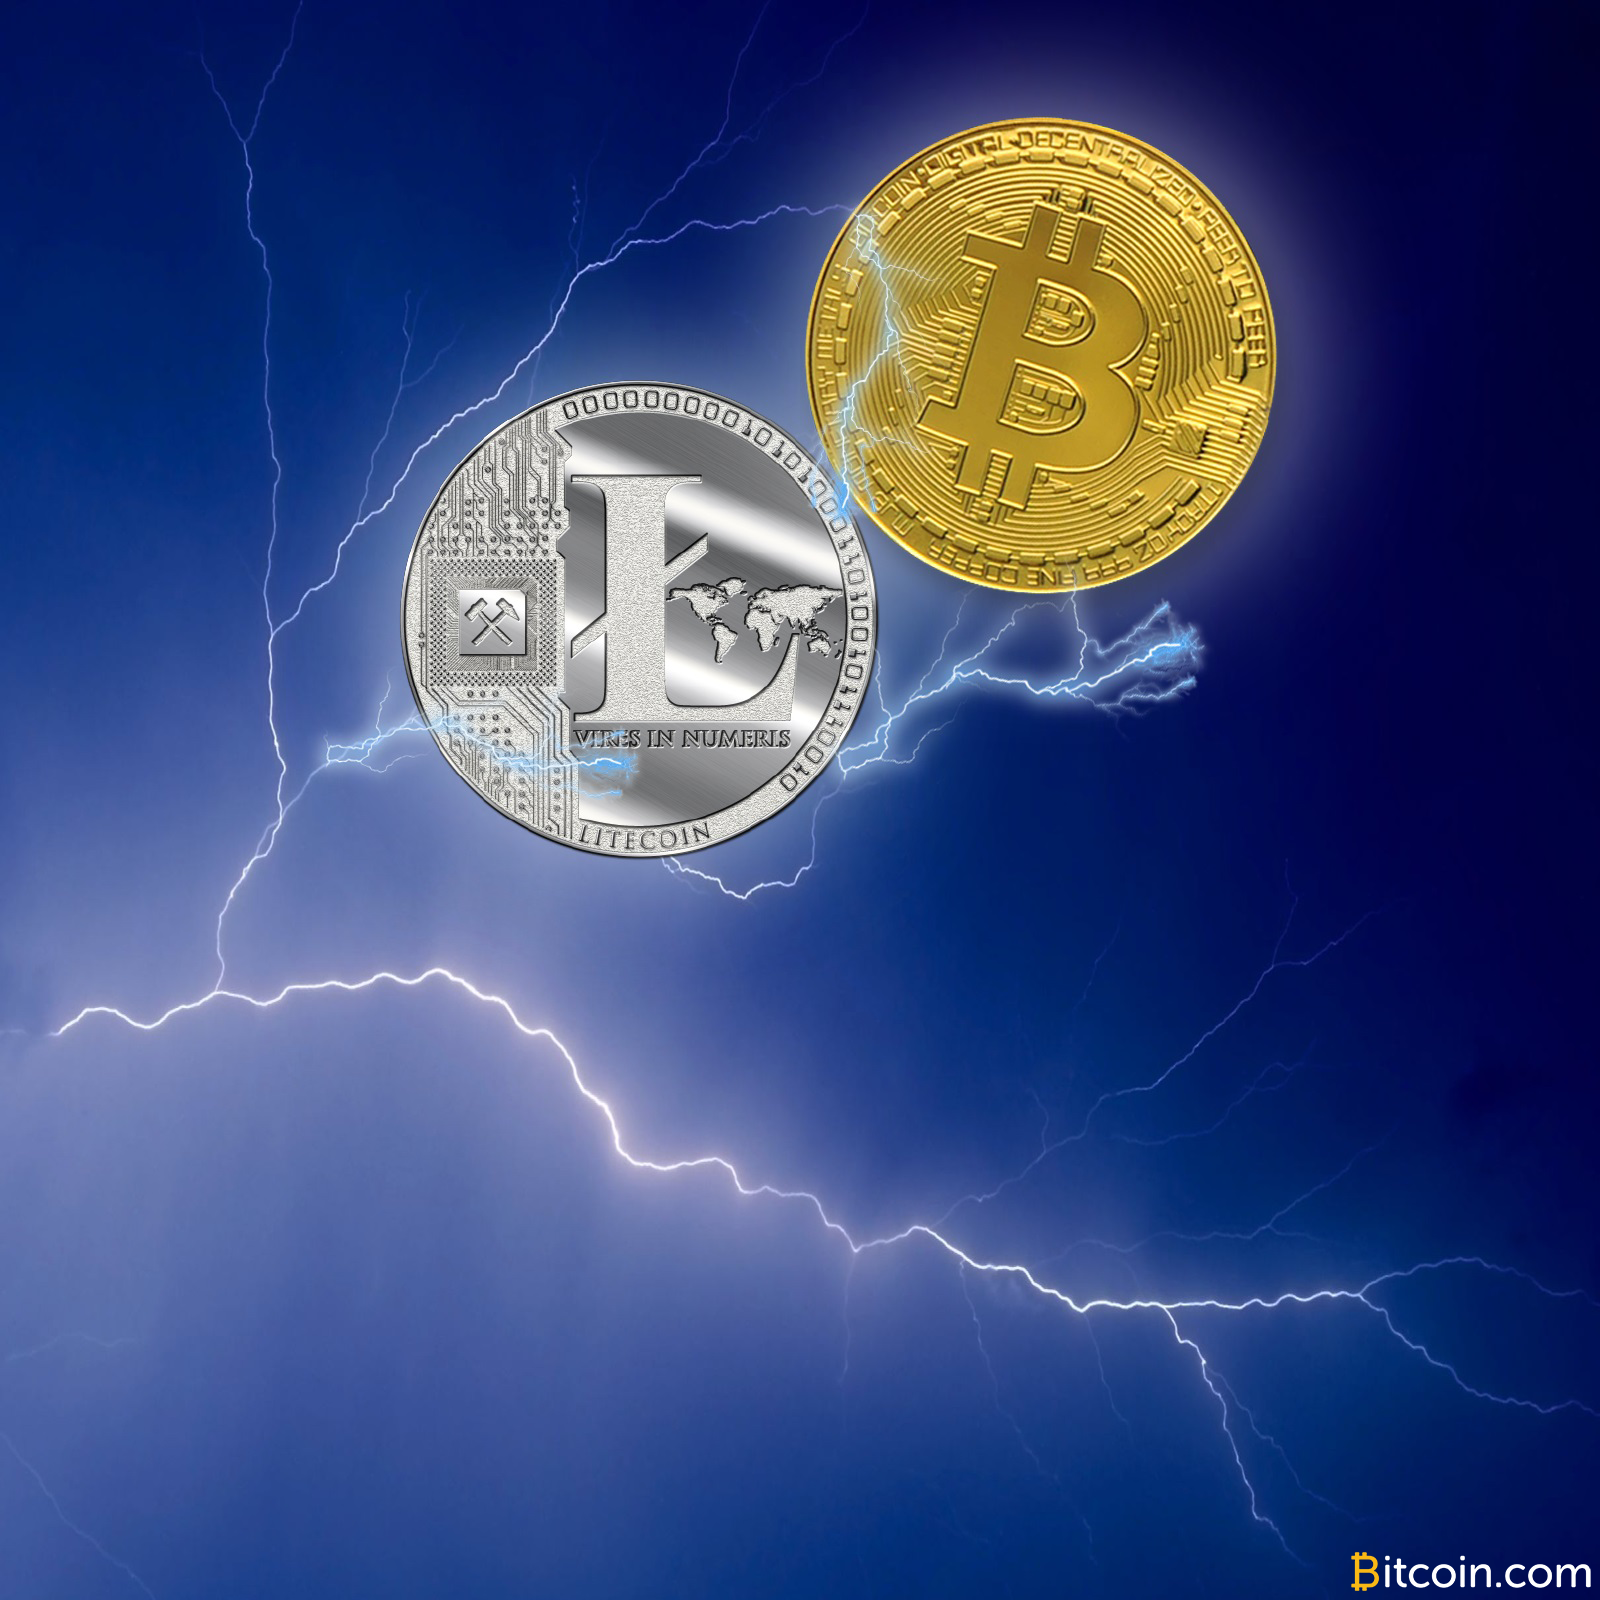 Lightning Network Launches Third Release Featuring Bitcoin & Litecoin Atomic Swaps